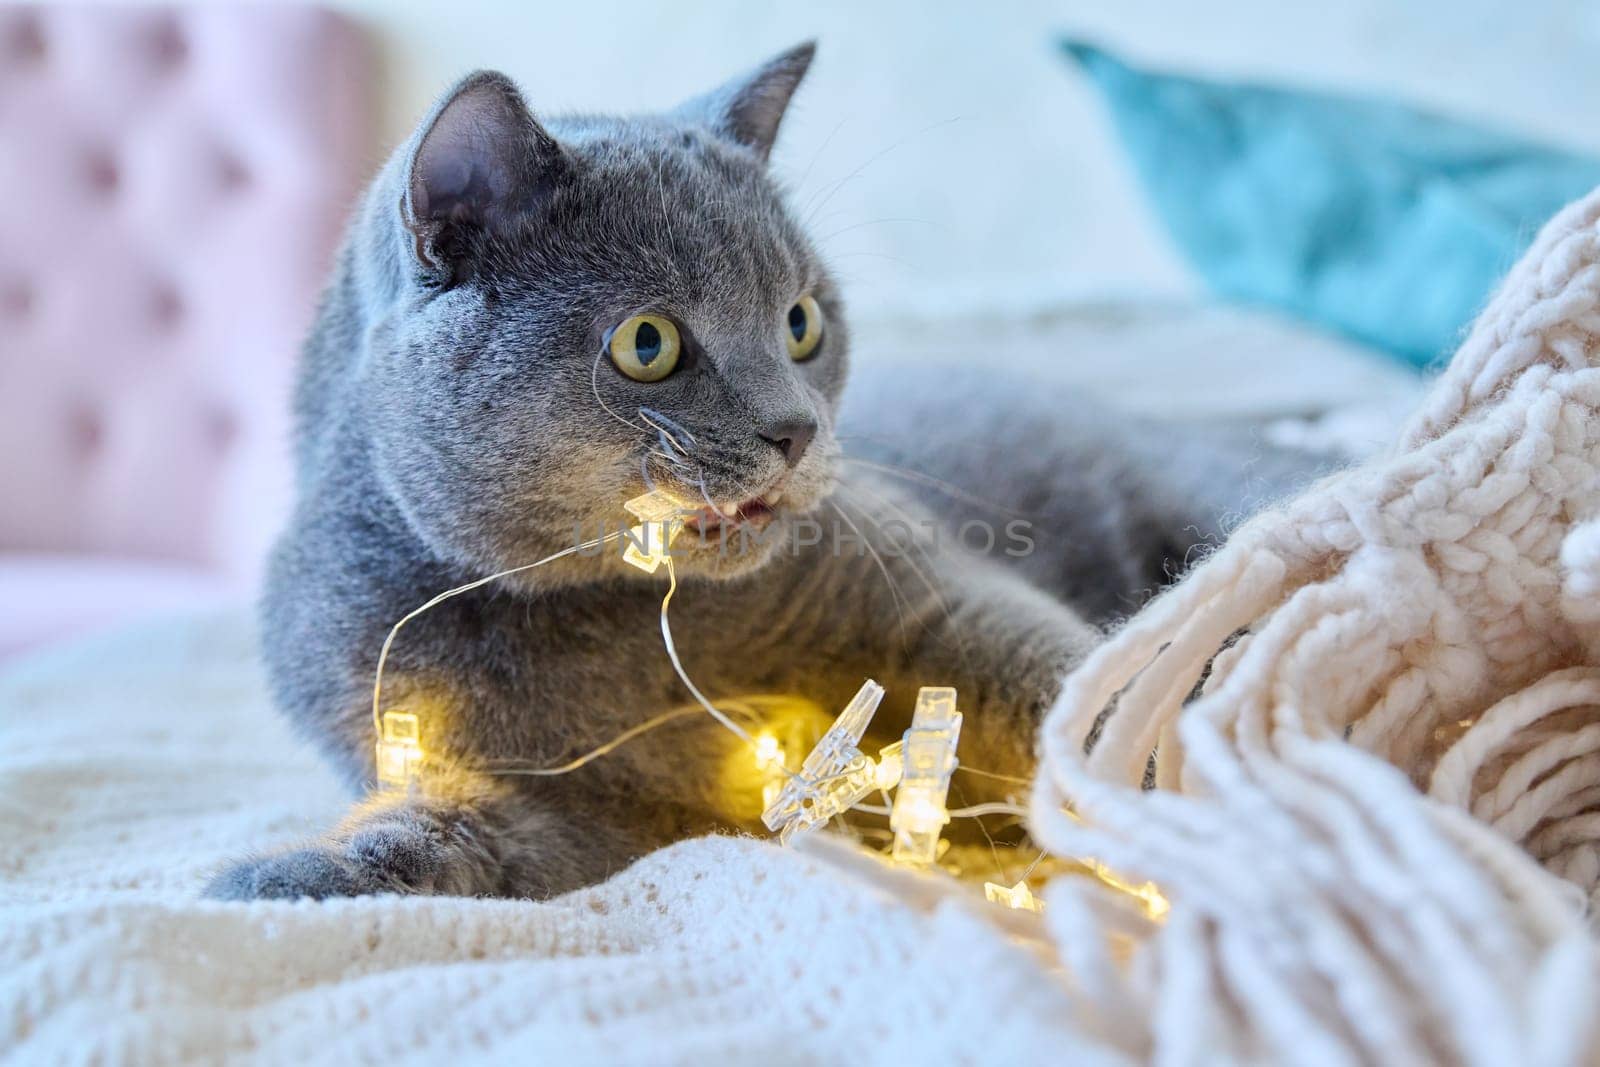 Funny pet cat with a New Year's garland in his mouth, lying on the bed at home